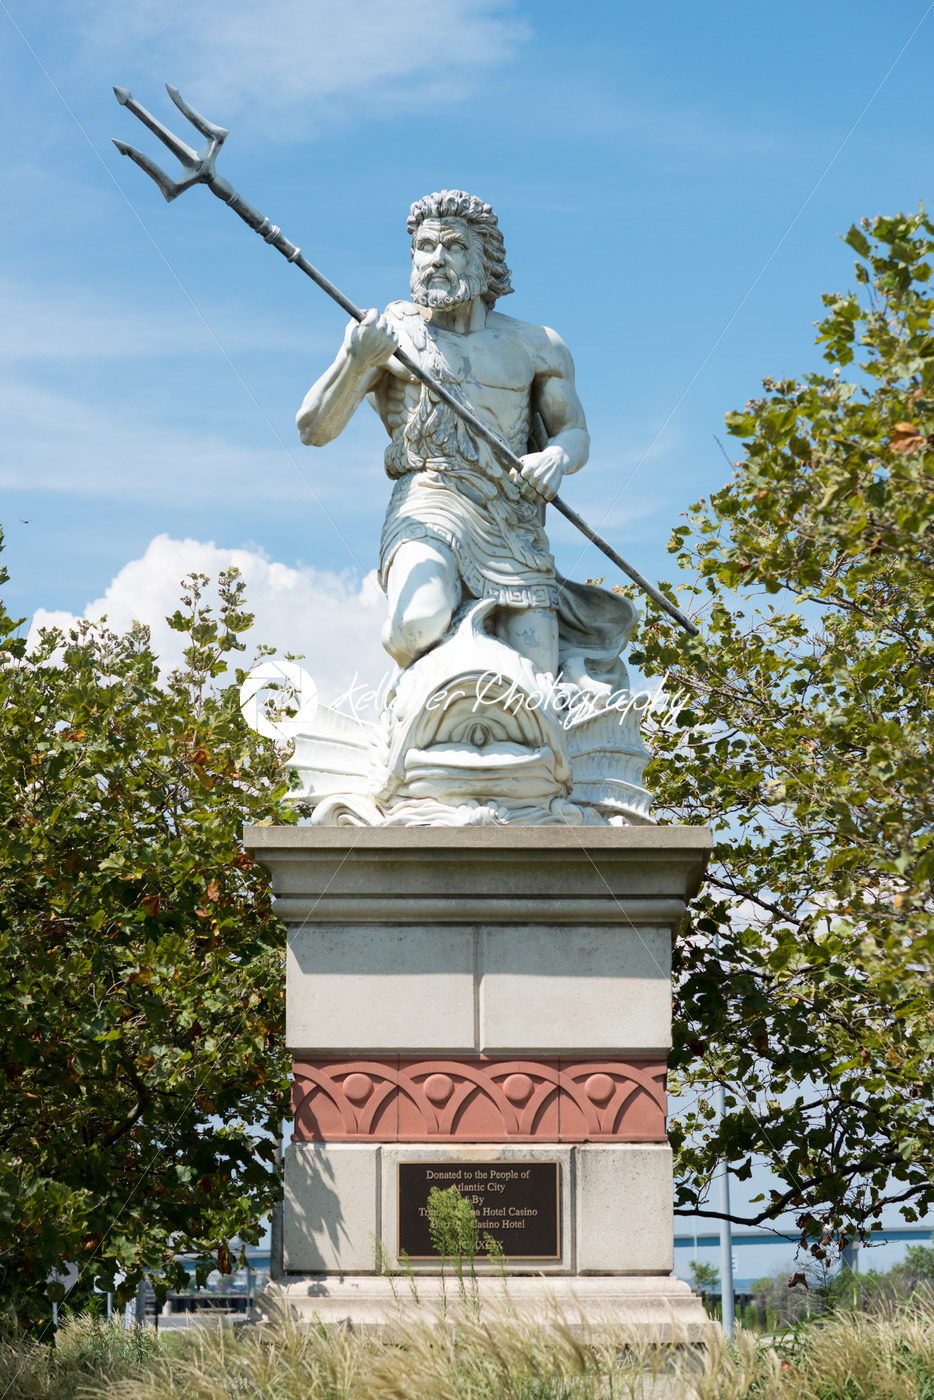 A large public statue of King Neptune that welcomes all to Atlantic City Aquarium in New Jersey - Kelleher Photography Store